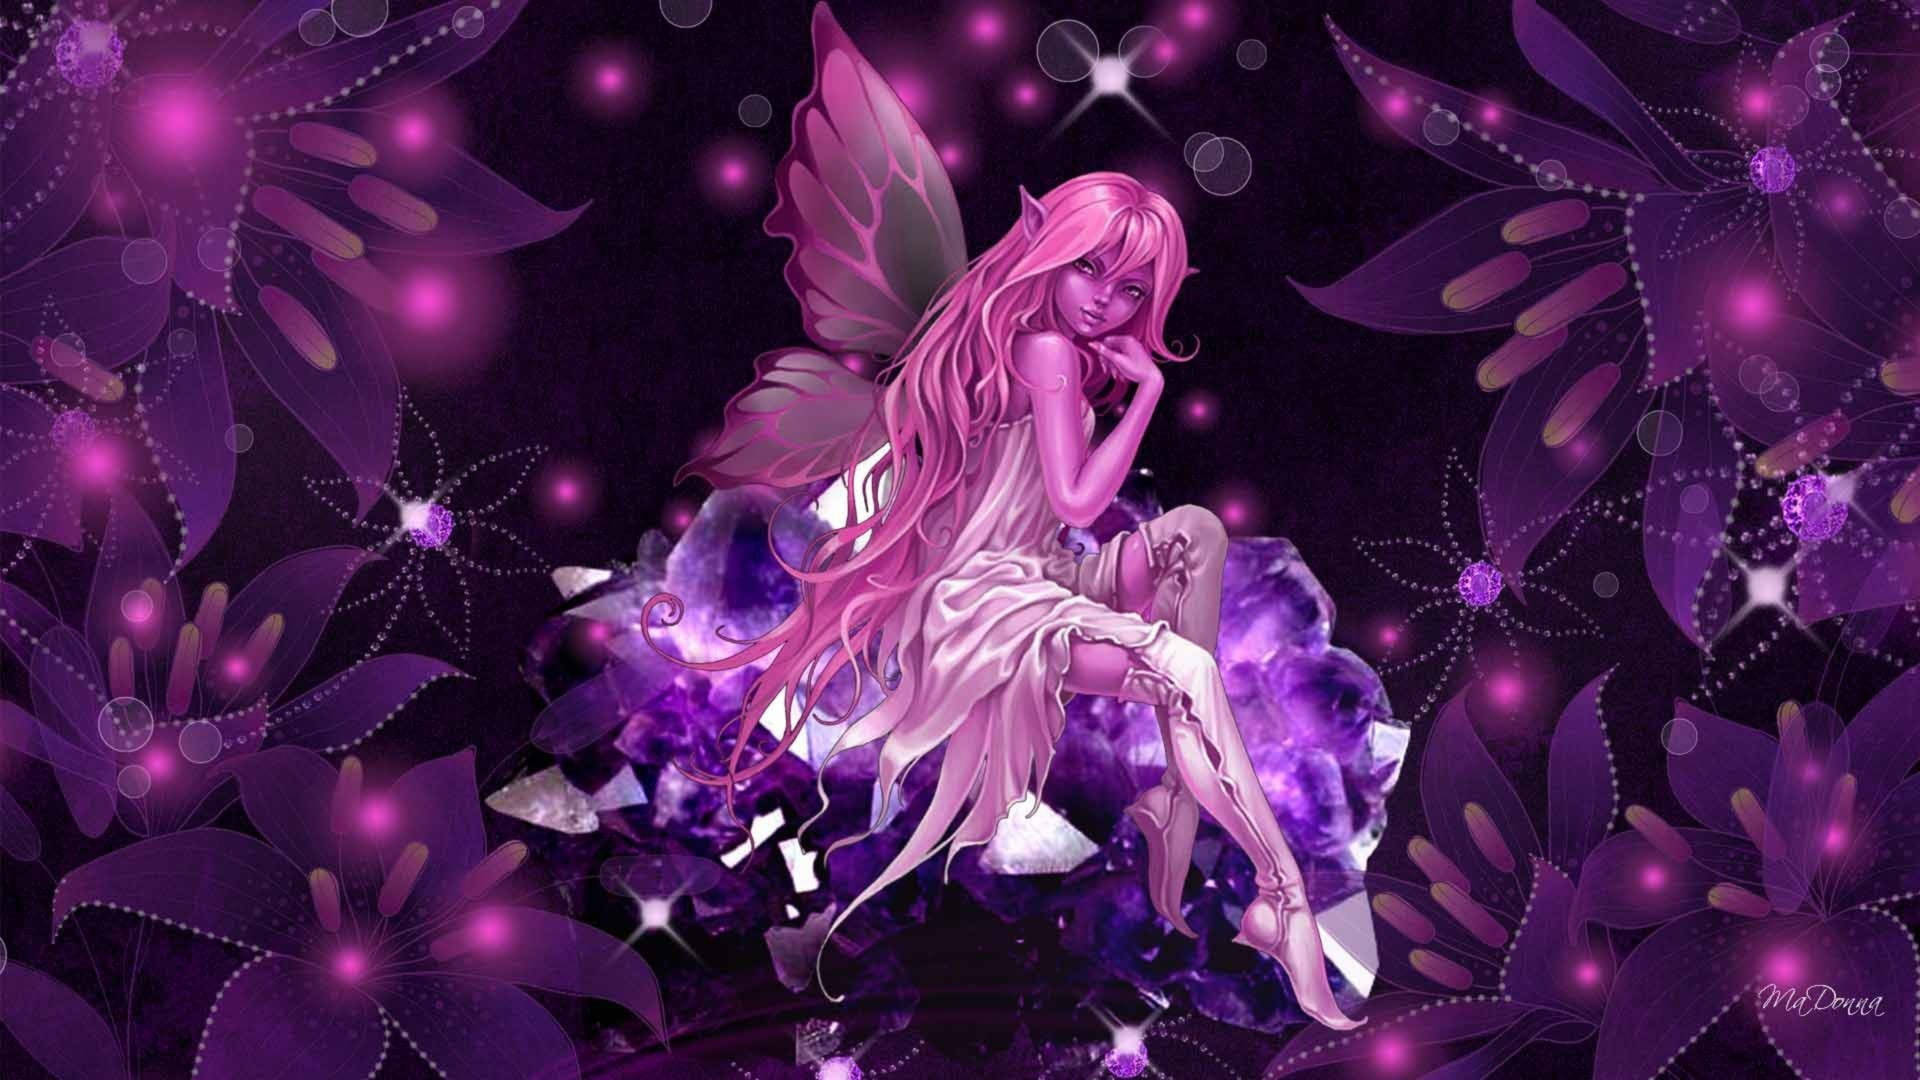 Free Pink Fairy Wallpaper Downloads, Pink Fairy Wallpaper for FREE